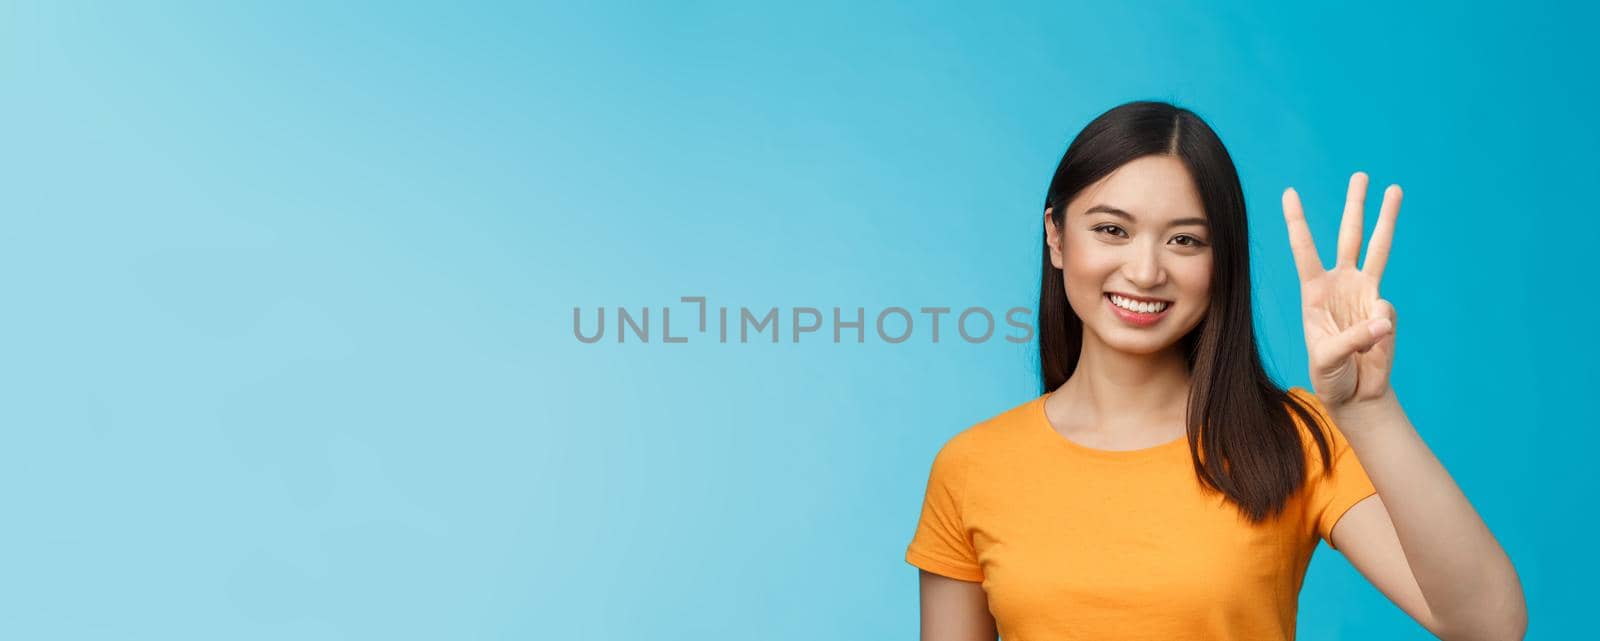 Friendly enthusiastic tender asian woman making reservation for three, number third, smiling broadly, stand blue background joyfully, posing near blue background in yellow t-shirt.